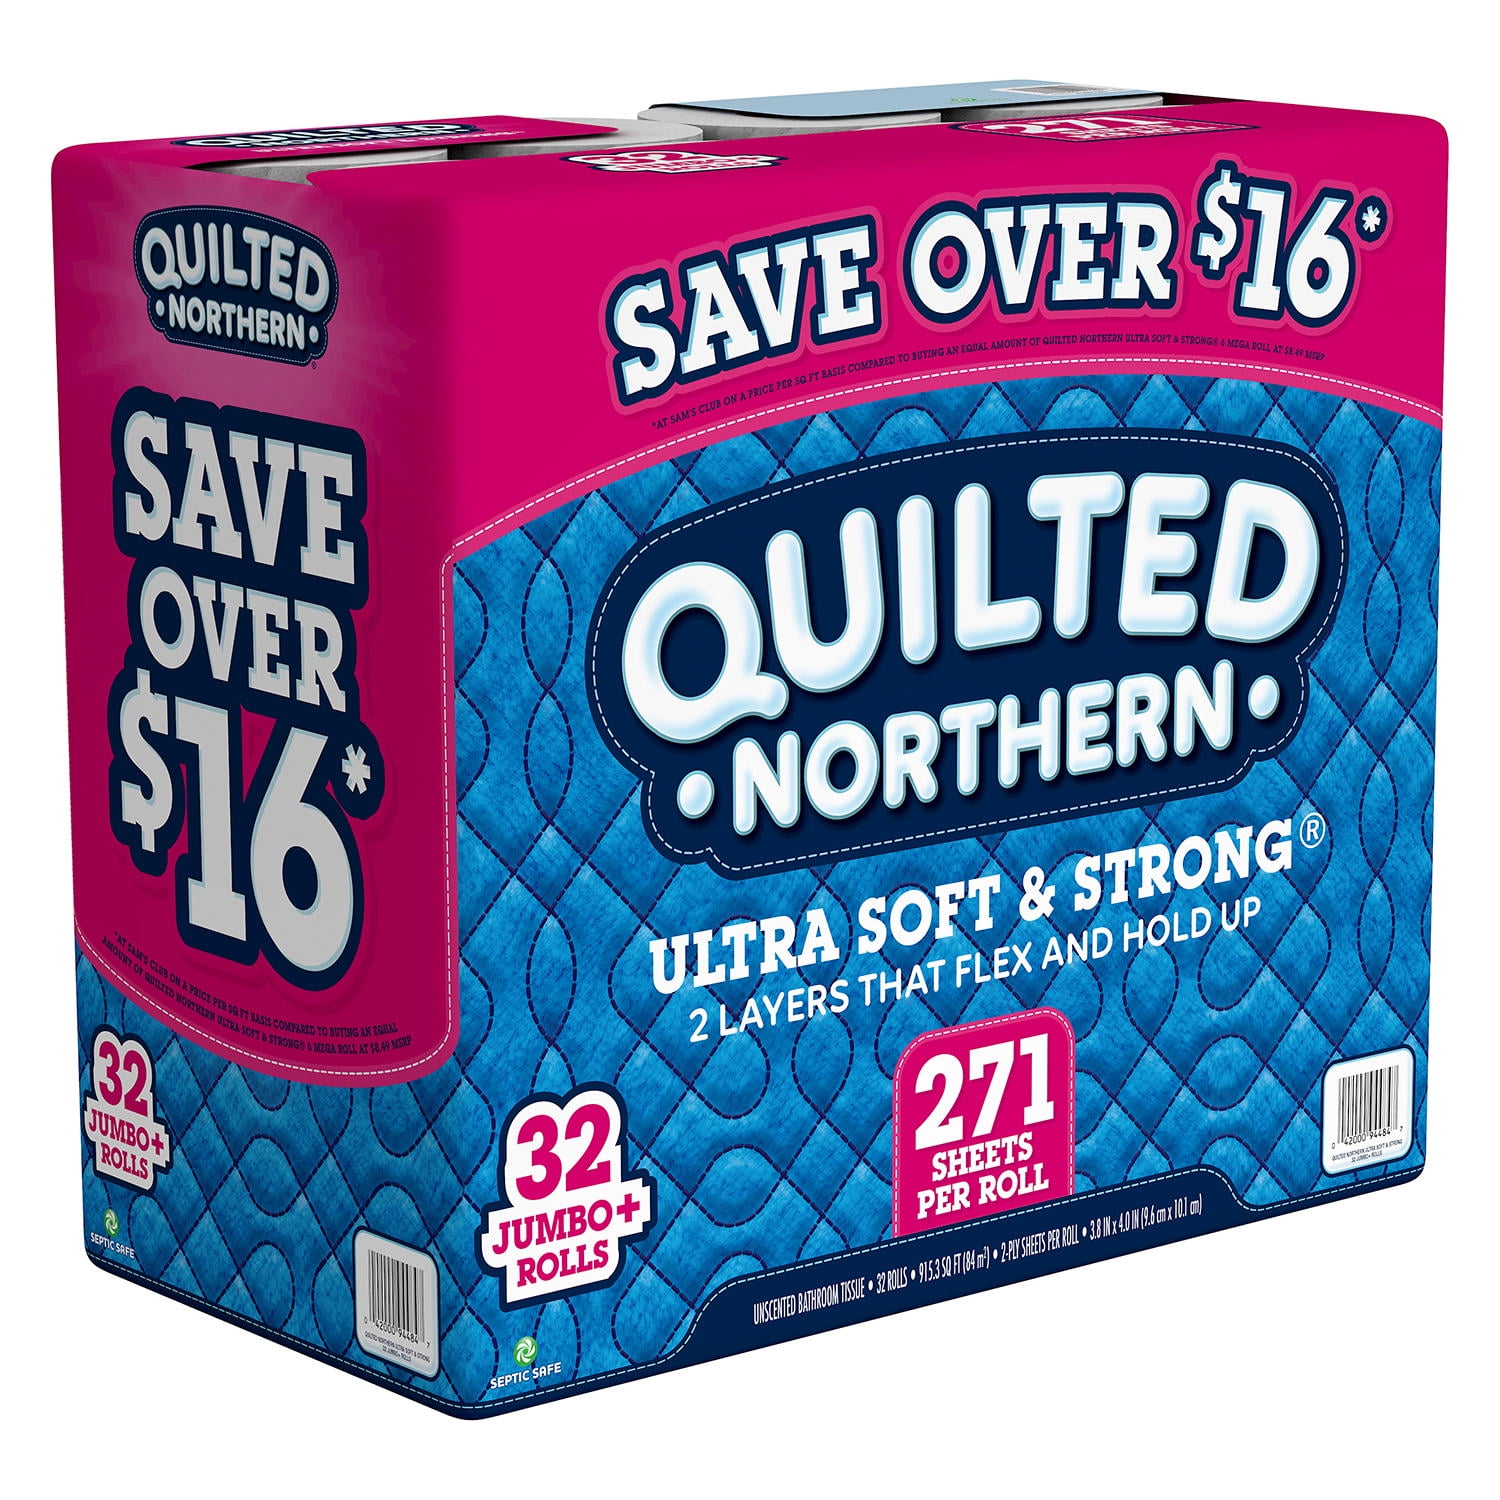 Quilted Northern Ultra Soft and Strong 271 Sheets/Roll Toilet Paper 32 Pieces for sale online 